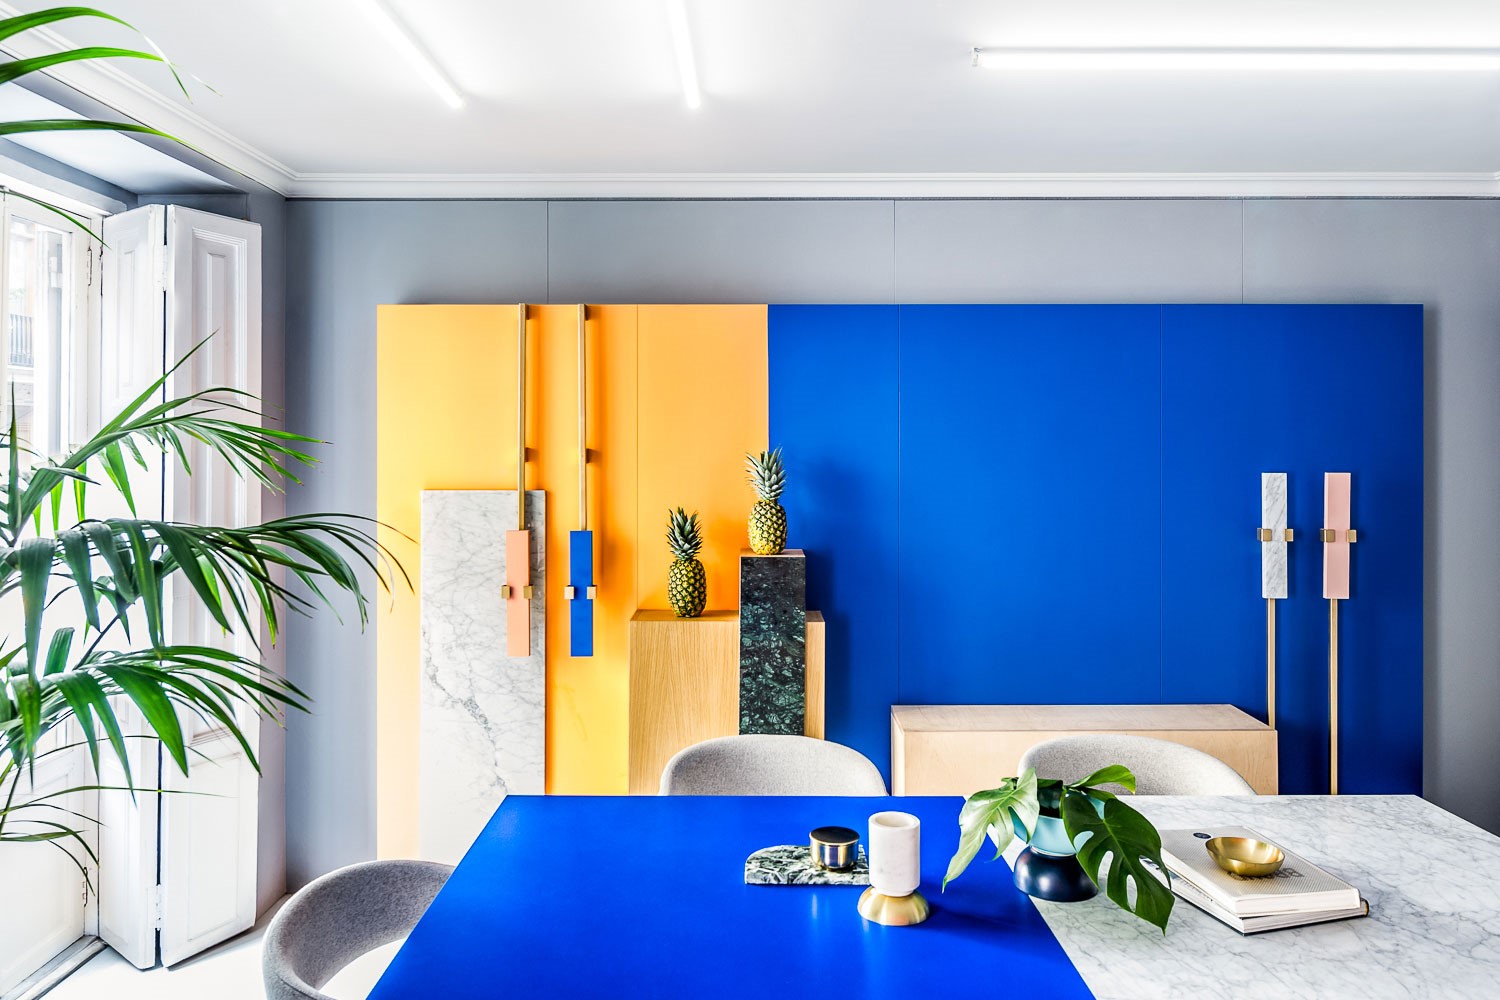 Masquespacios workspace, blue and yellow